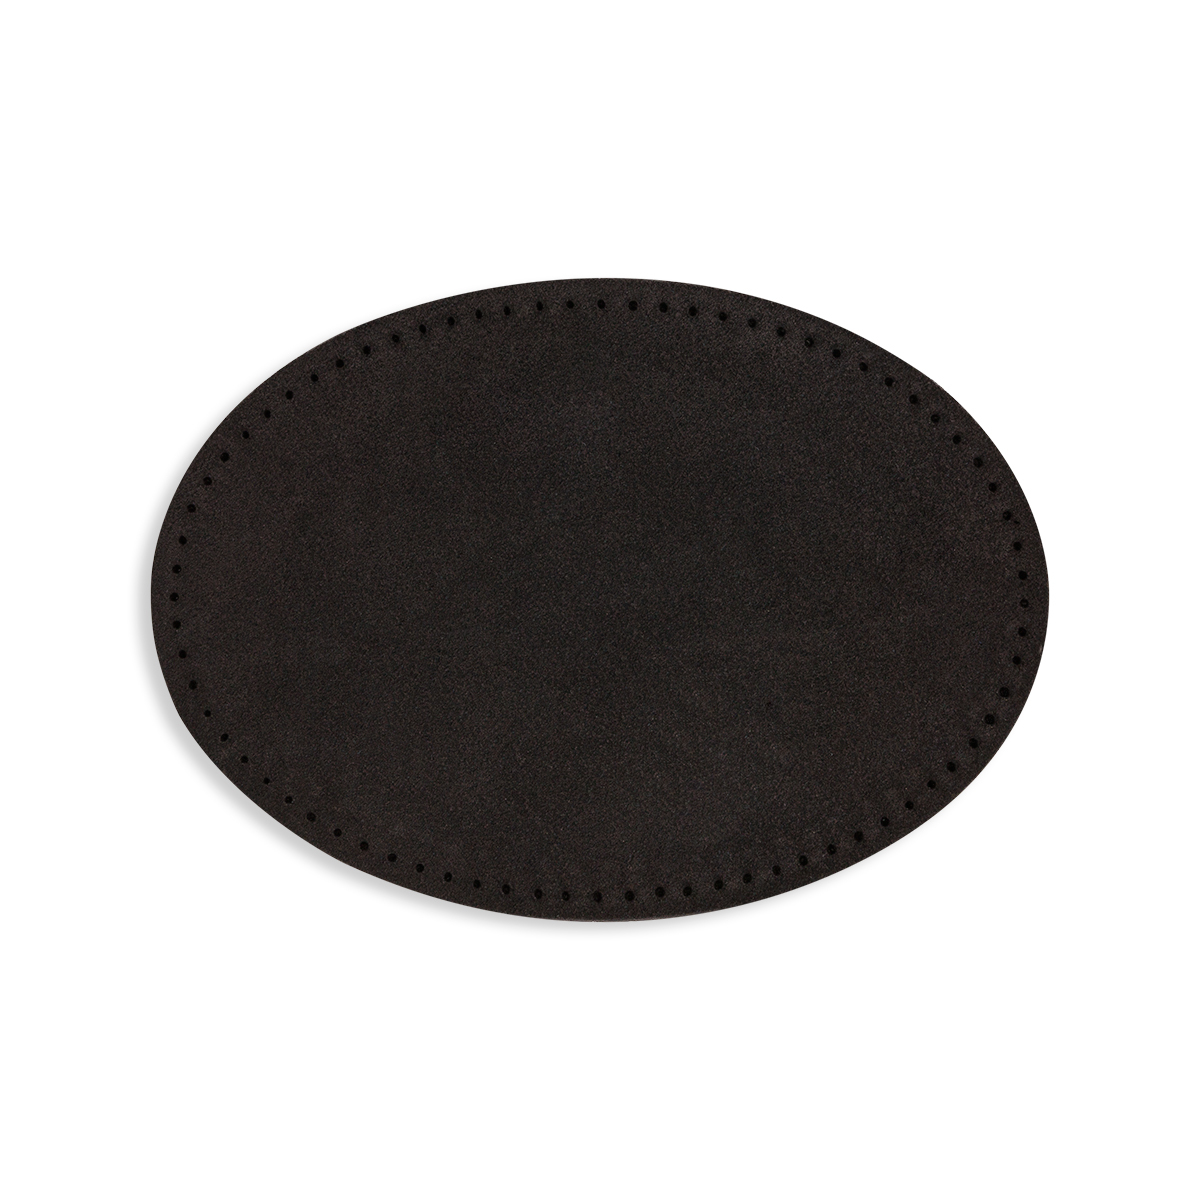 Dritz Suede Cowhide Elbow Patches, 2 pc, Brown